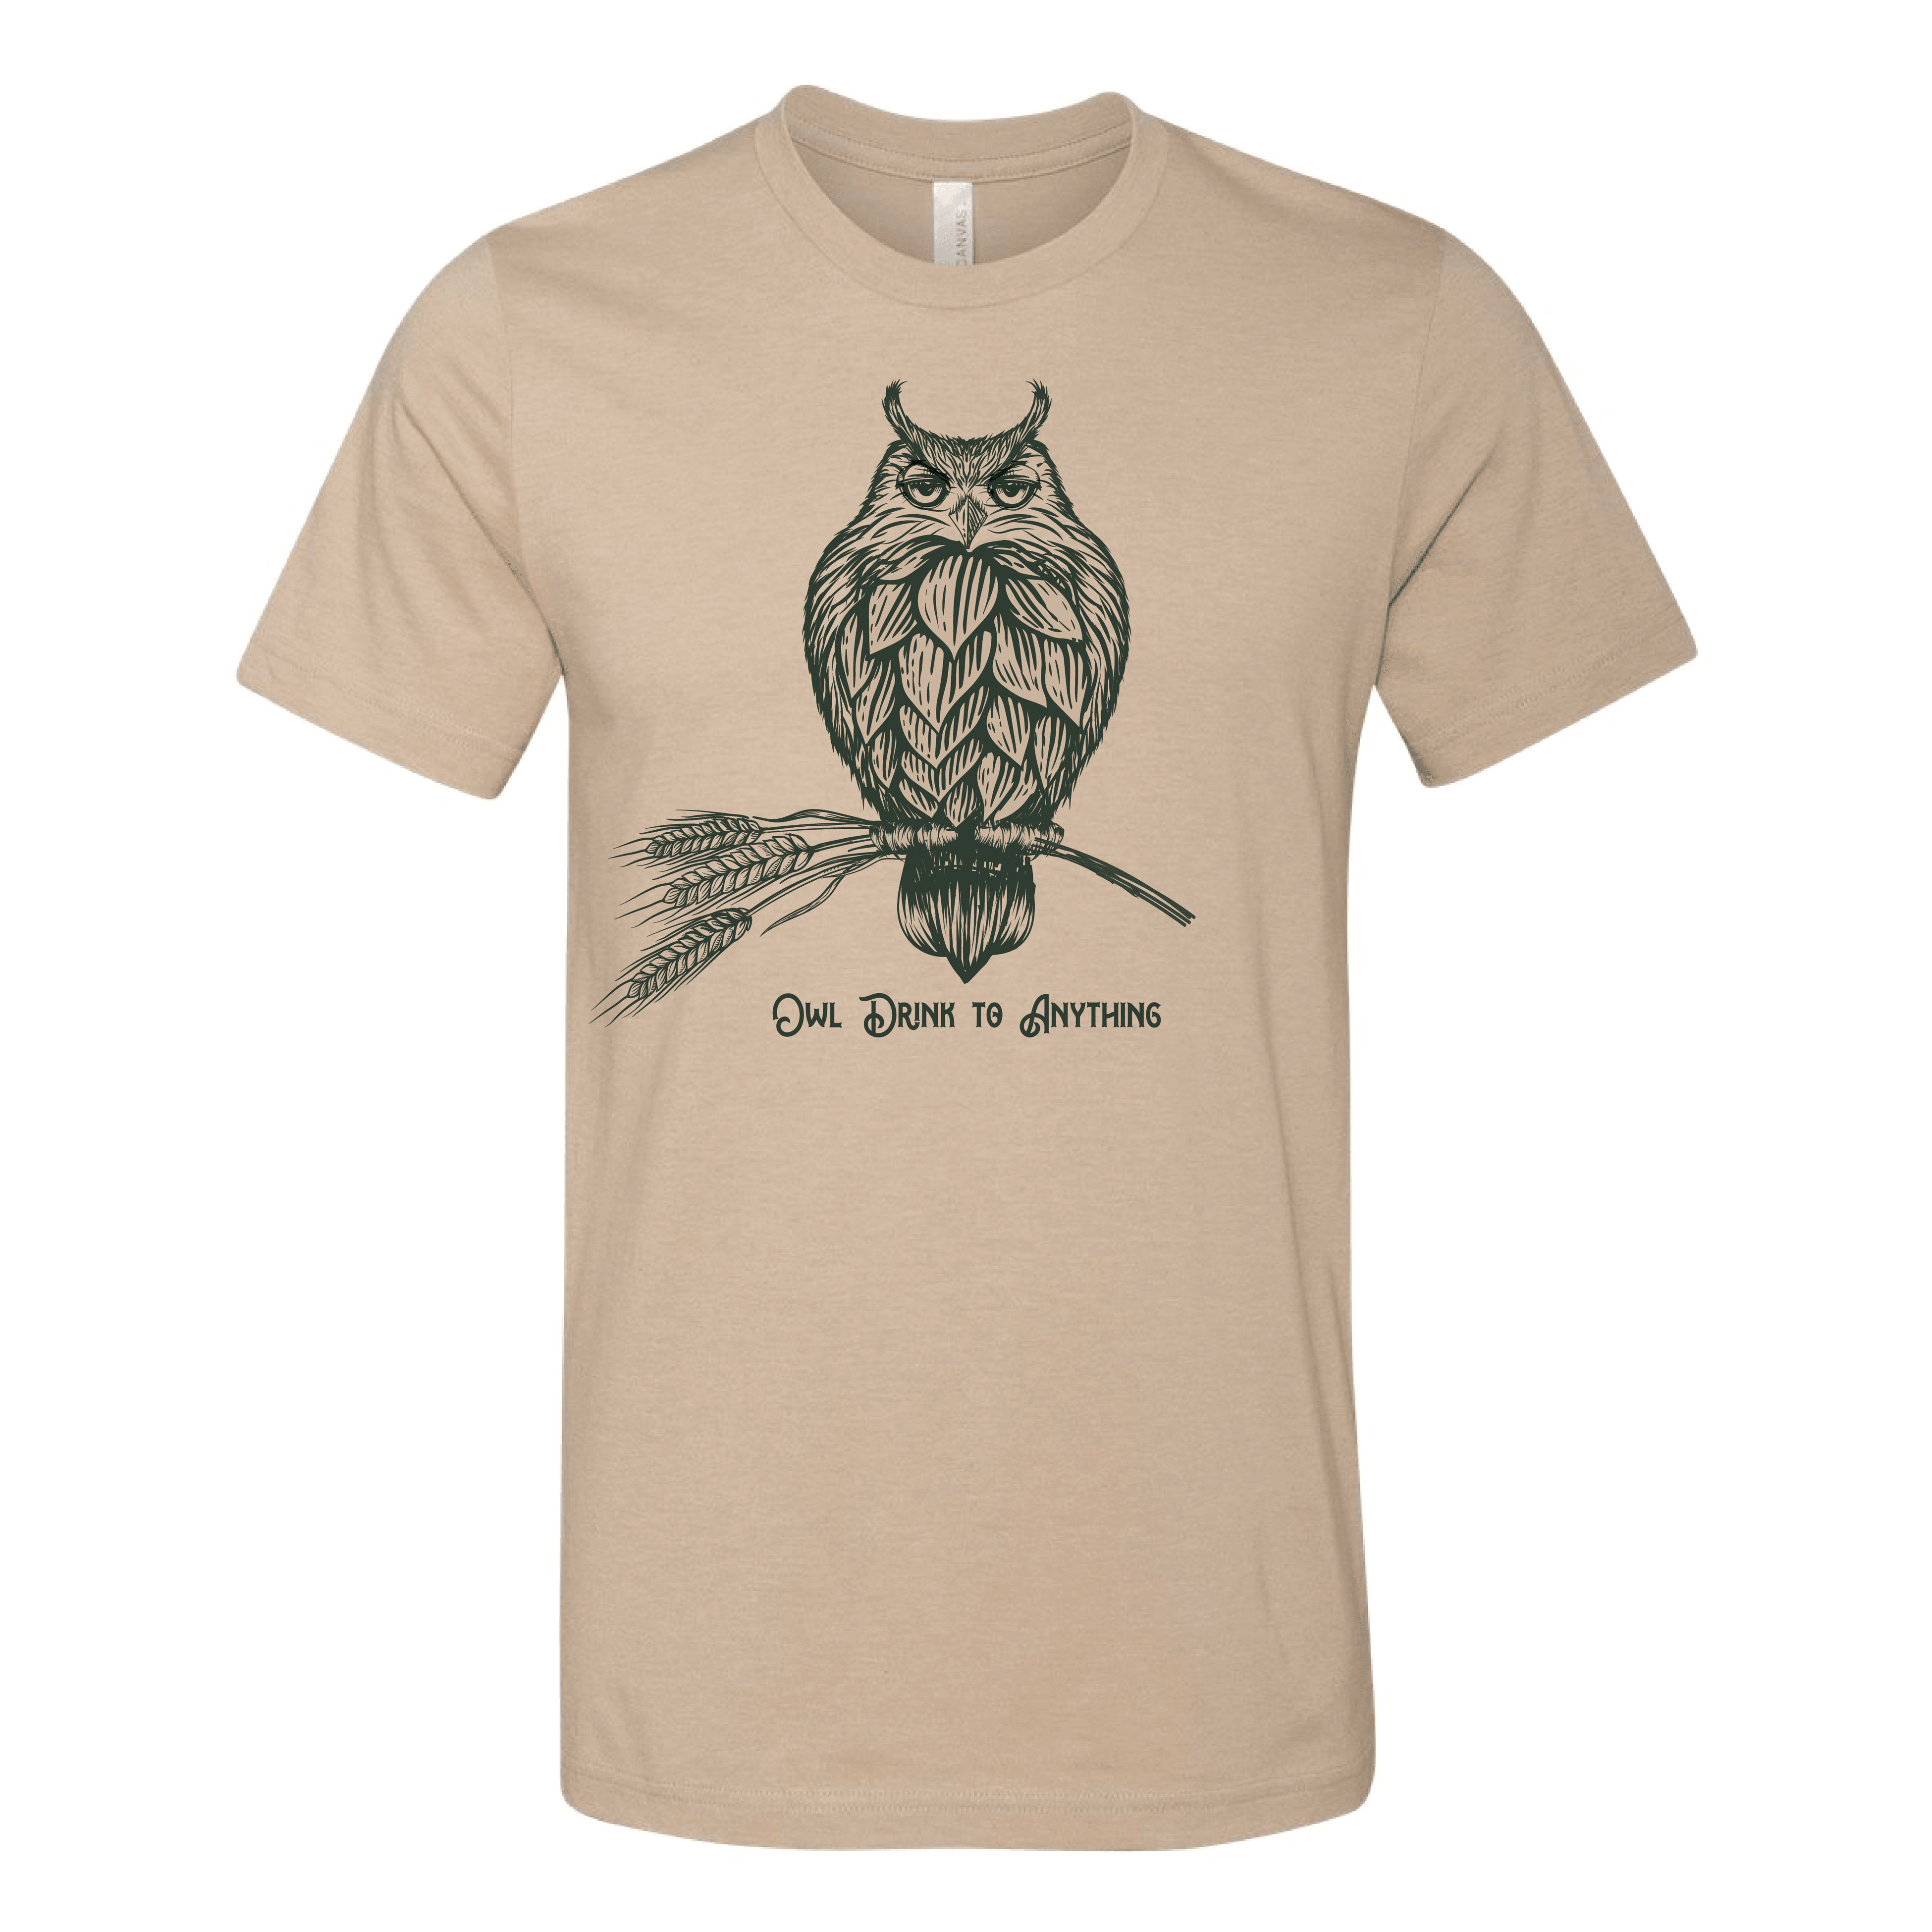 Owl drink to anything T-Shirt - Ales to Trails